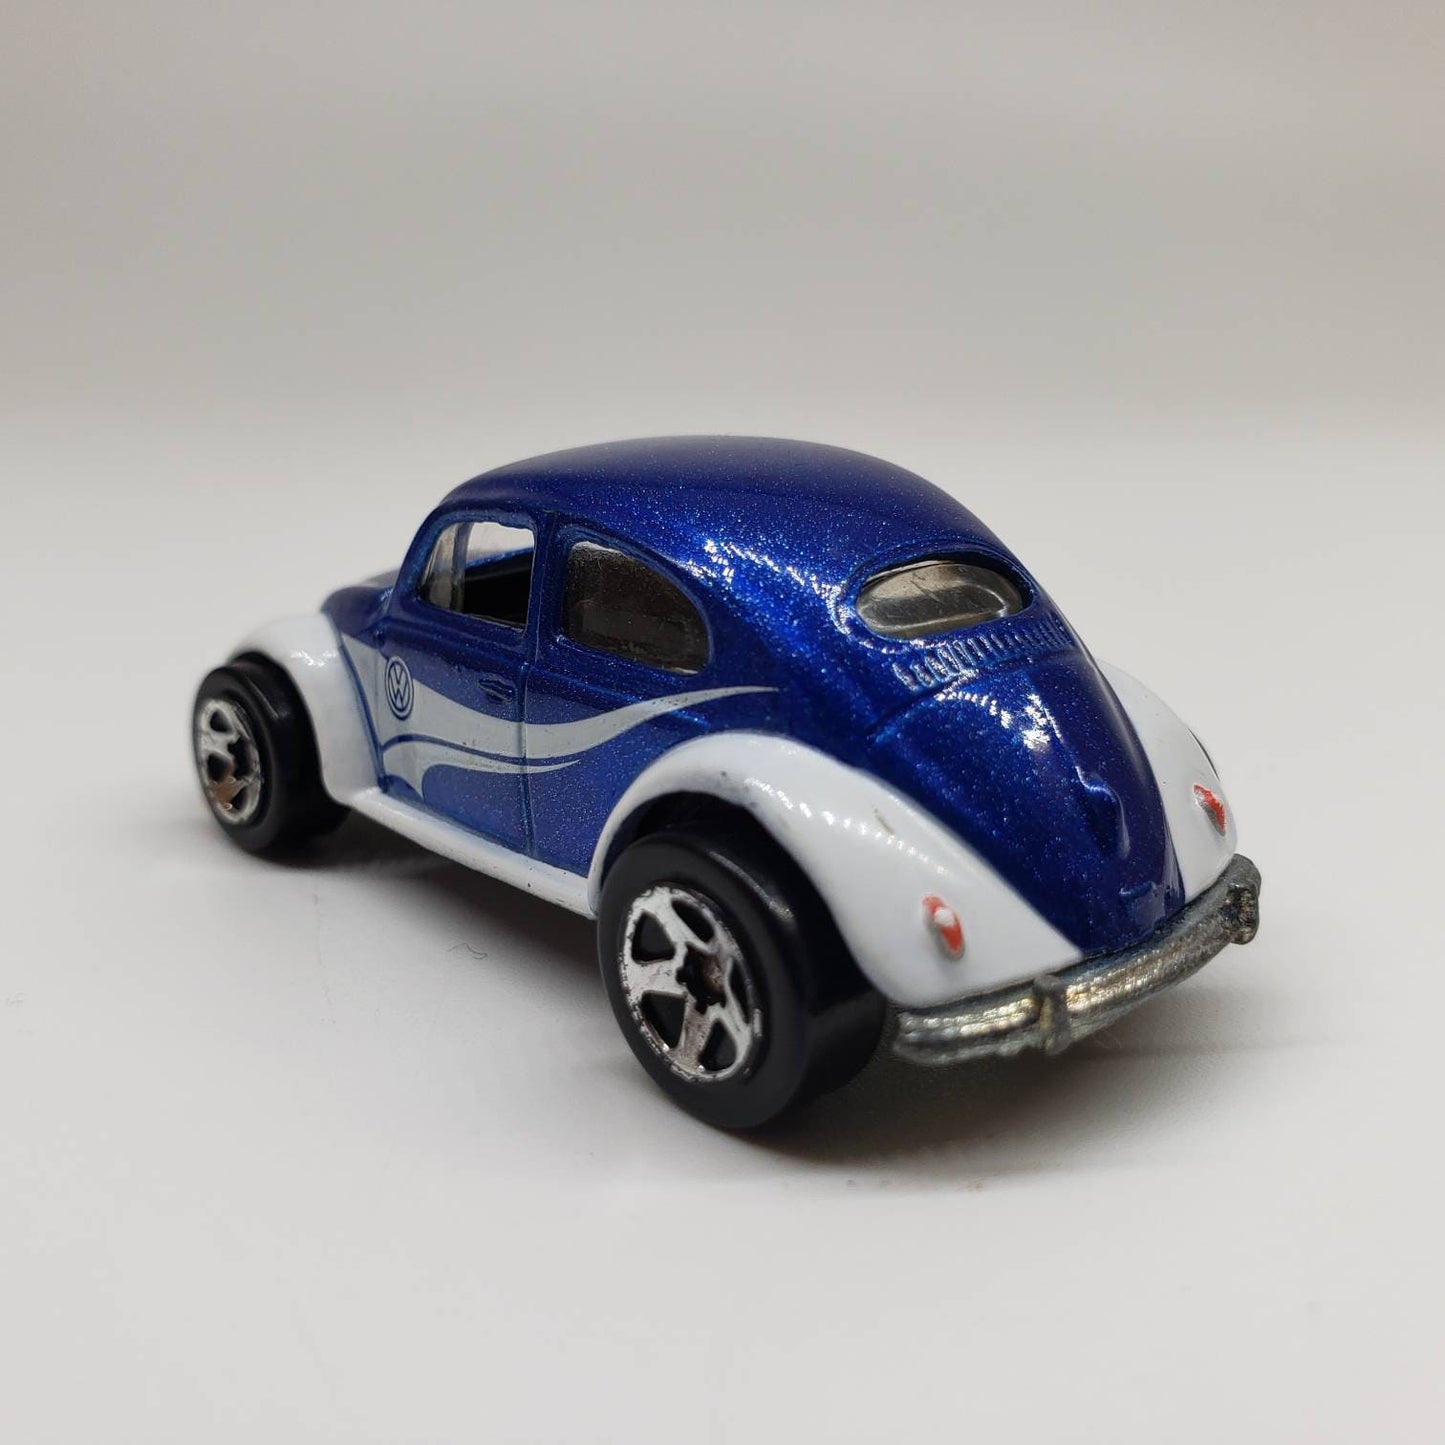 Hot Wheels VW Bug Blue Mystery Cars Volkswagen Beetle Collectible Miniature Scale Model Toy Car Perfect Birthday Gift